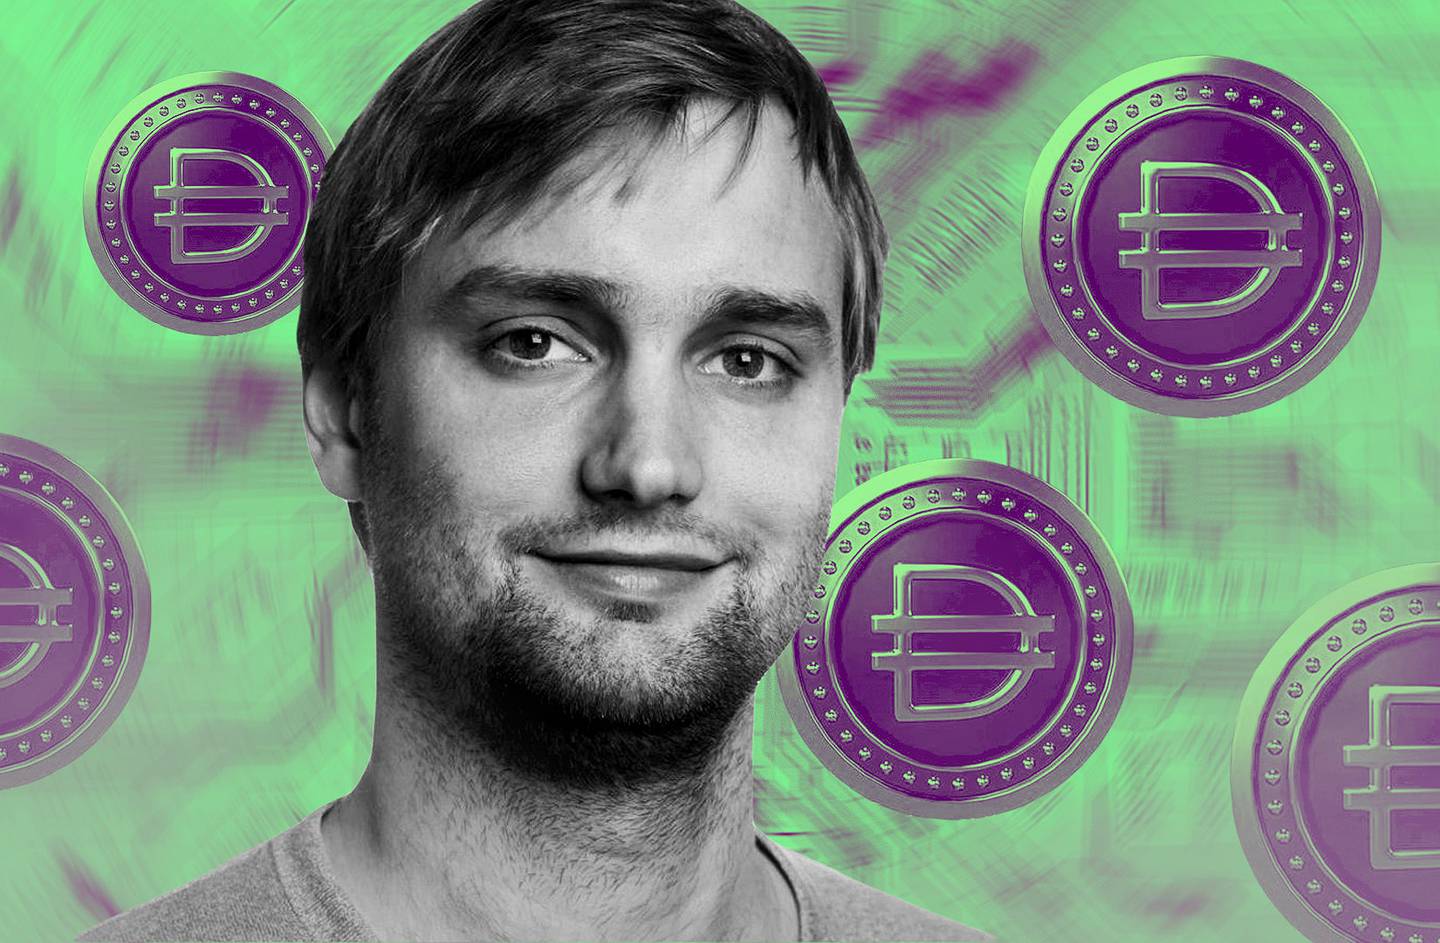 Portrait of Rune Christensen over a background of a blurred circuit board with superimposed Dai stablecoins.